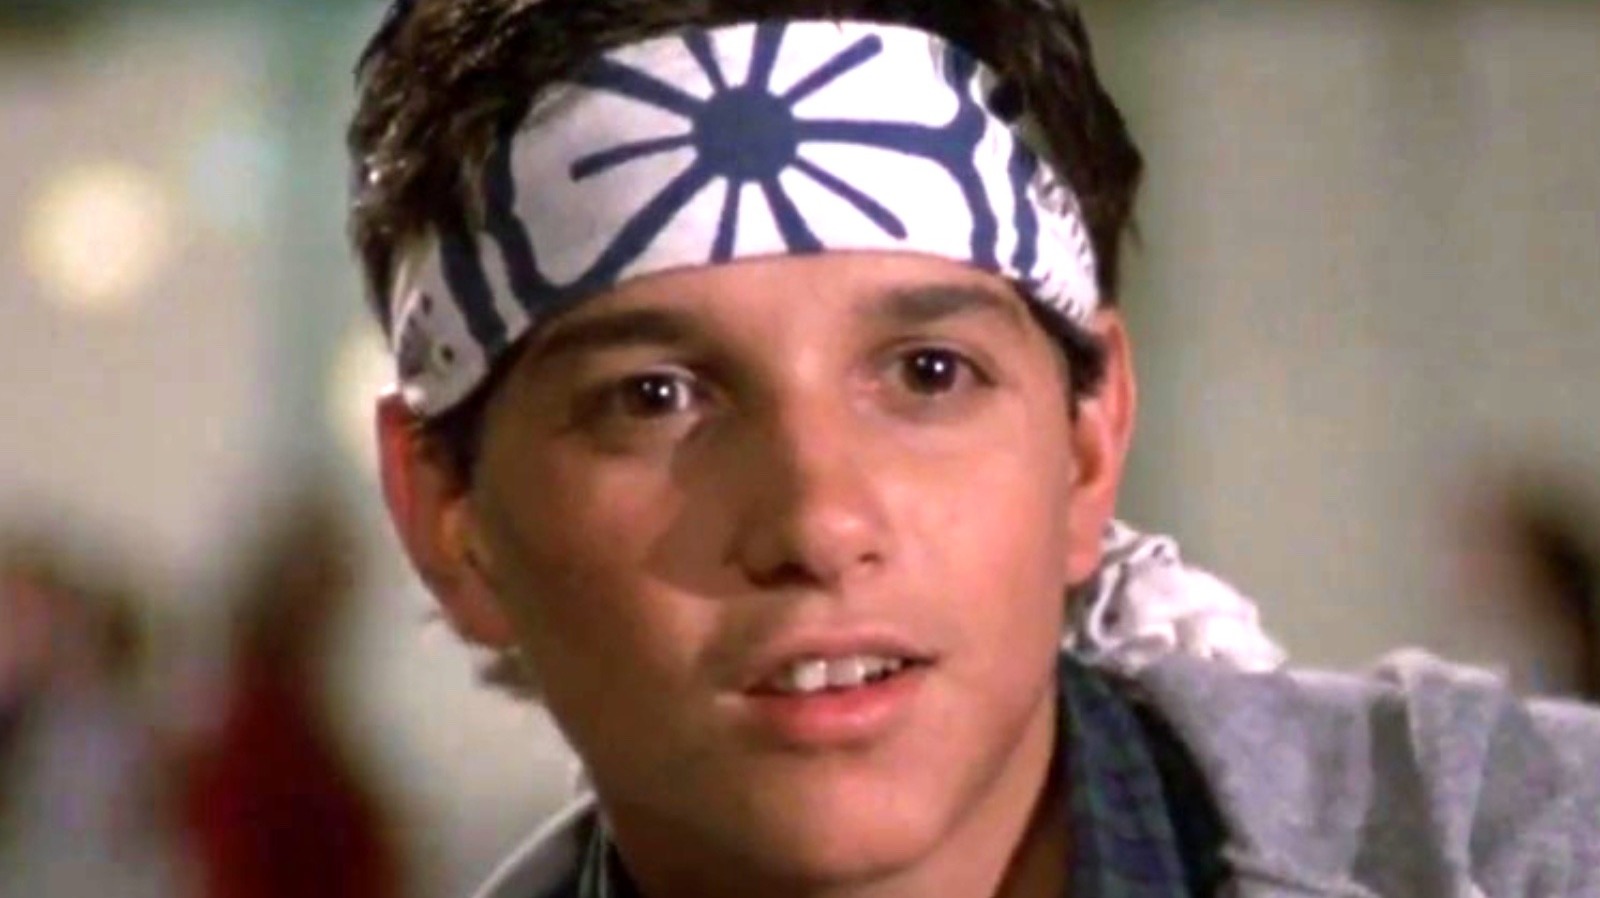 https://www.looper.com/img/gallery/small-details-you-missed-in-the-karate-kid-movies/l-intro-1616453180.jpg